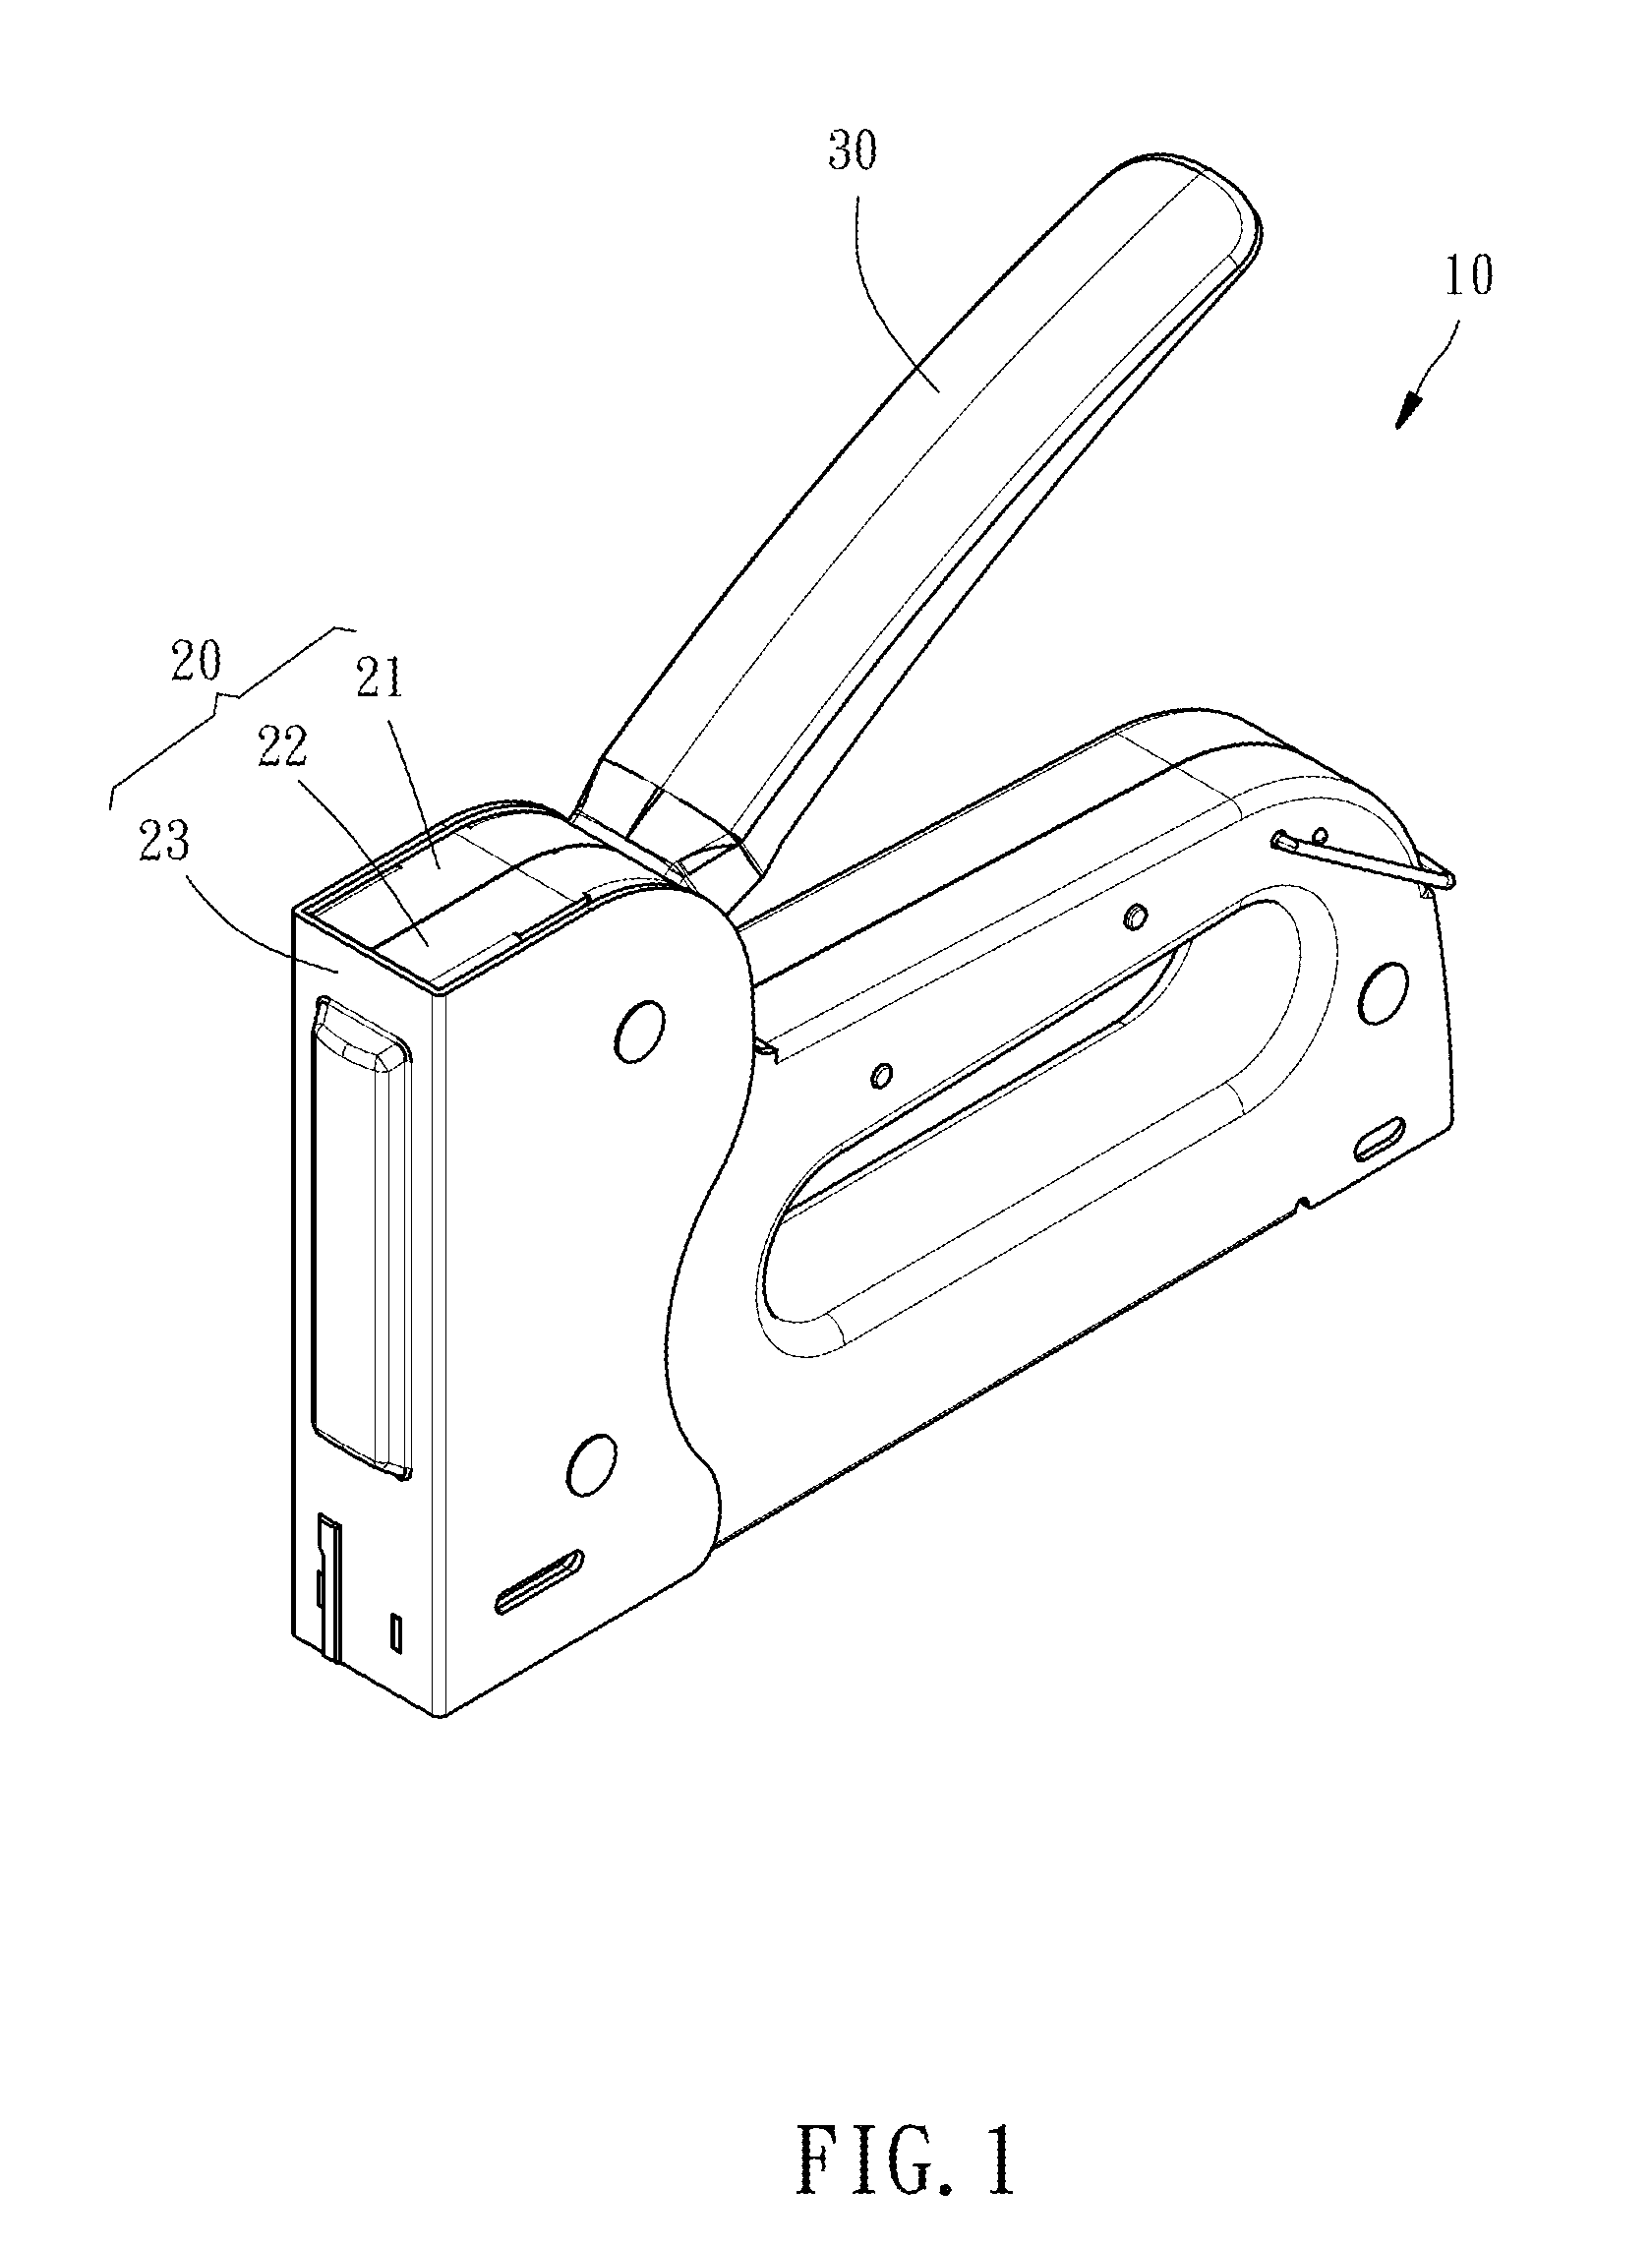 Staple gun automatically applicable to staples of multiple sorts